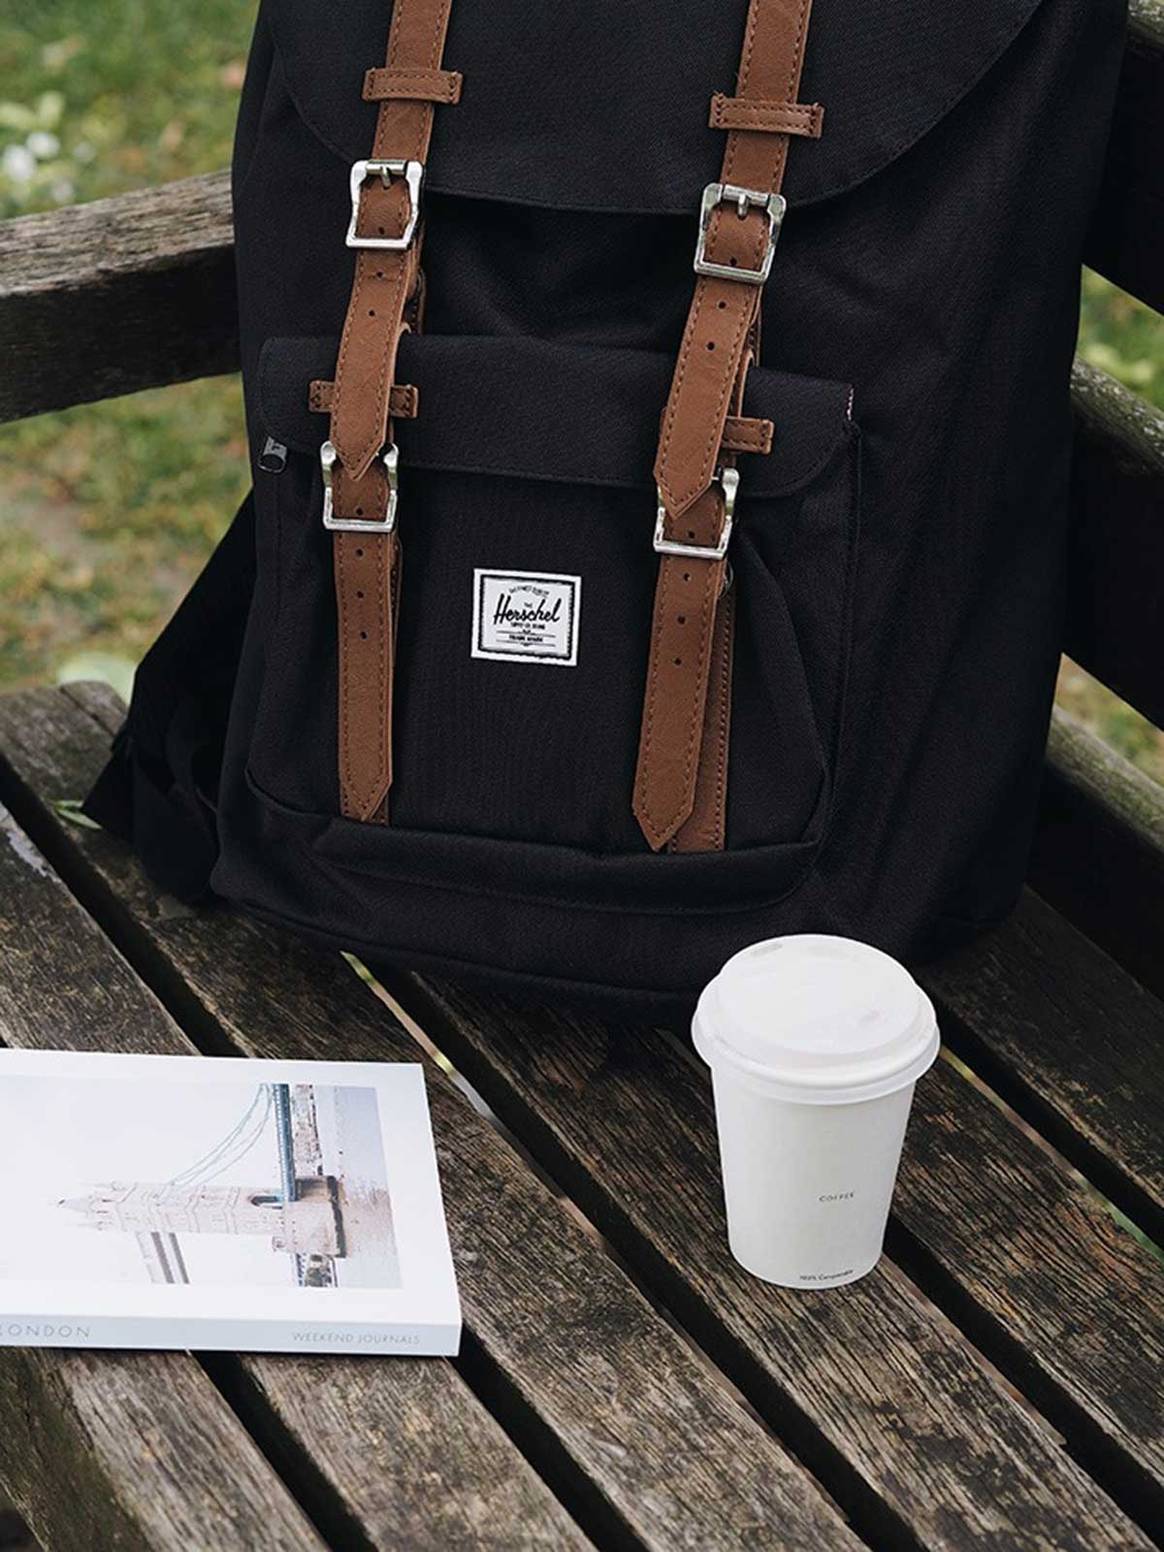 Herschel Supply co-founder Lyndon Cormack talks past & future as brand turns 10